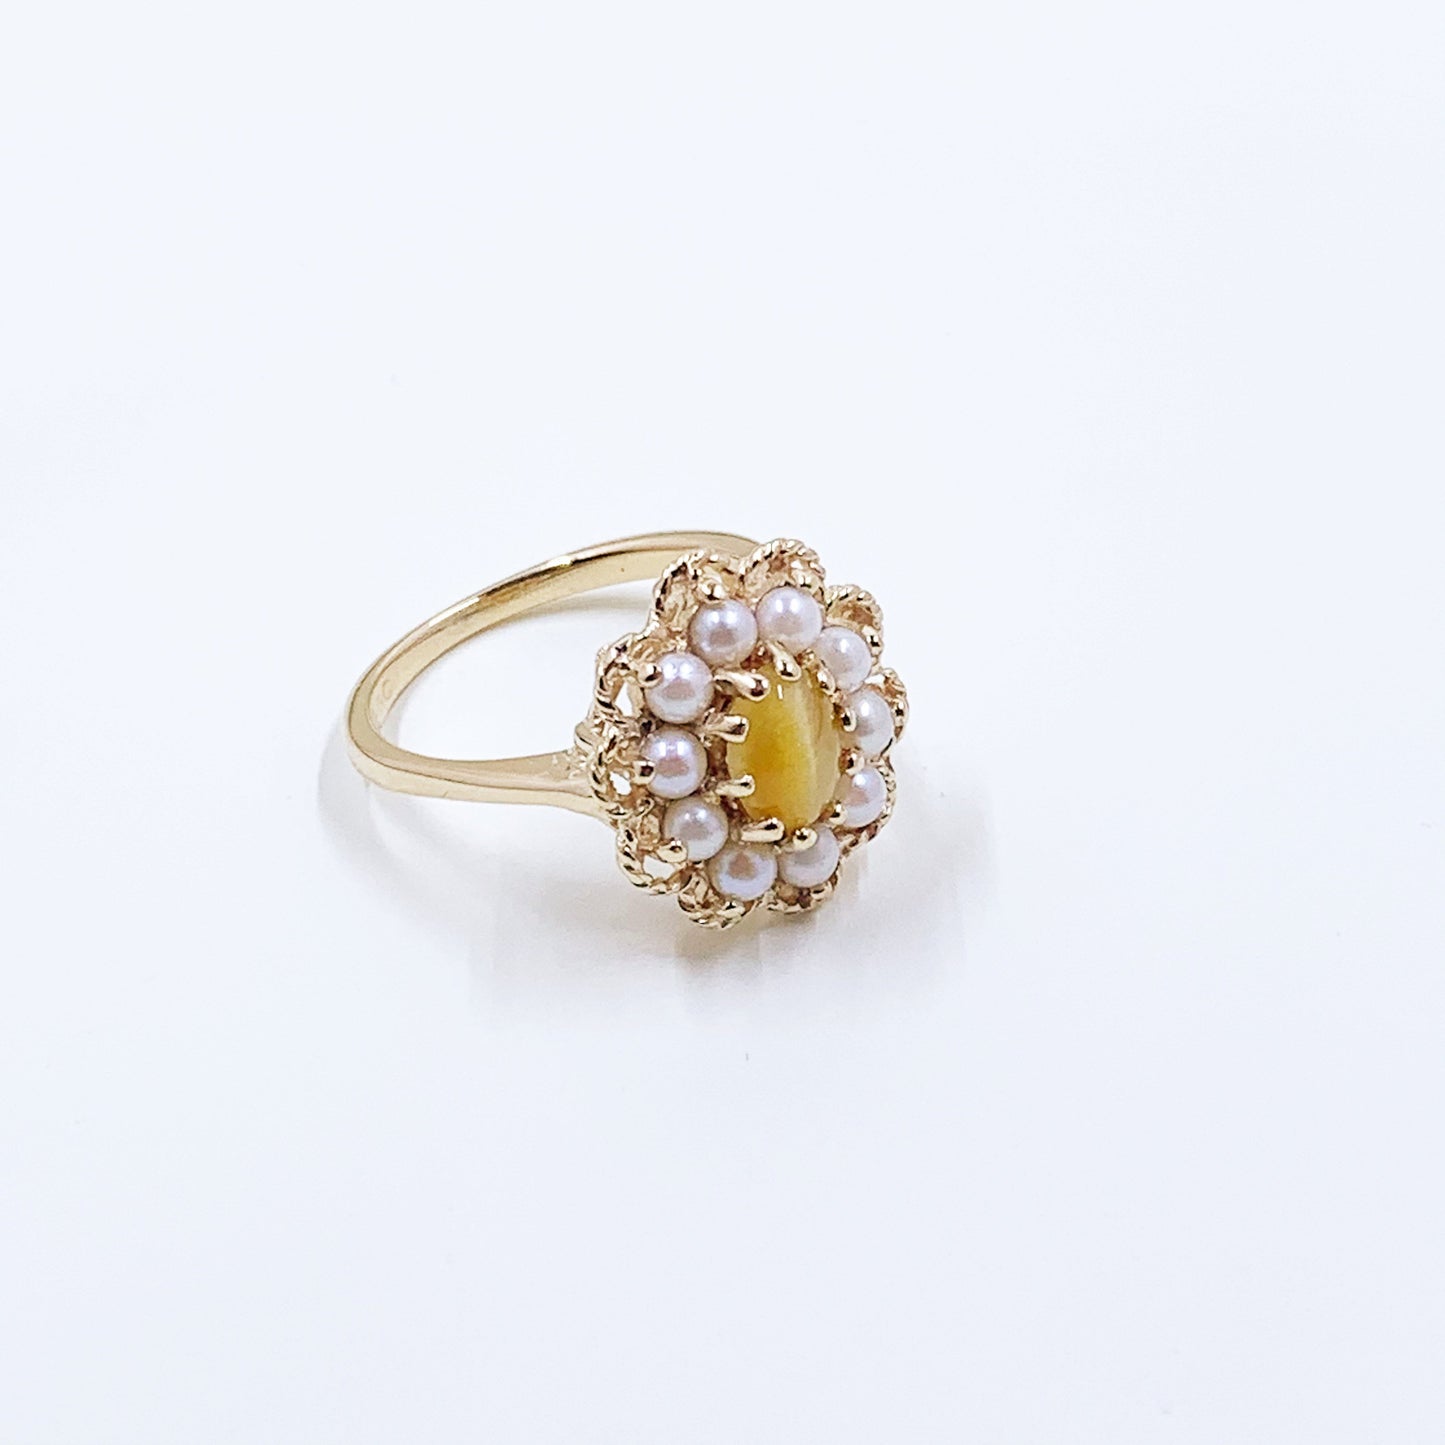 Vintage Gold Tigers Eye and Pearl Halo Ring | 14K Gold Halo Flower Ring | KGC Ring | Size 7 1/4